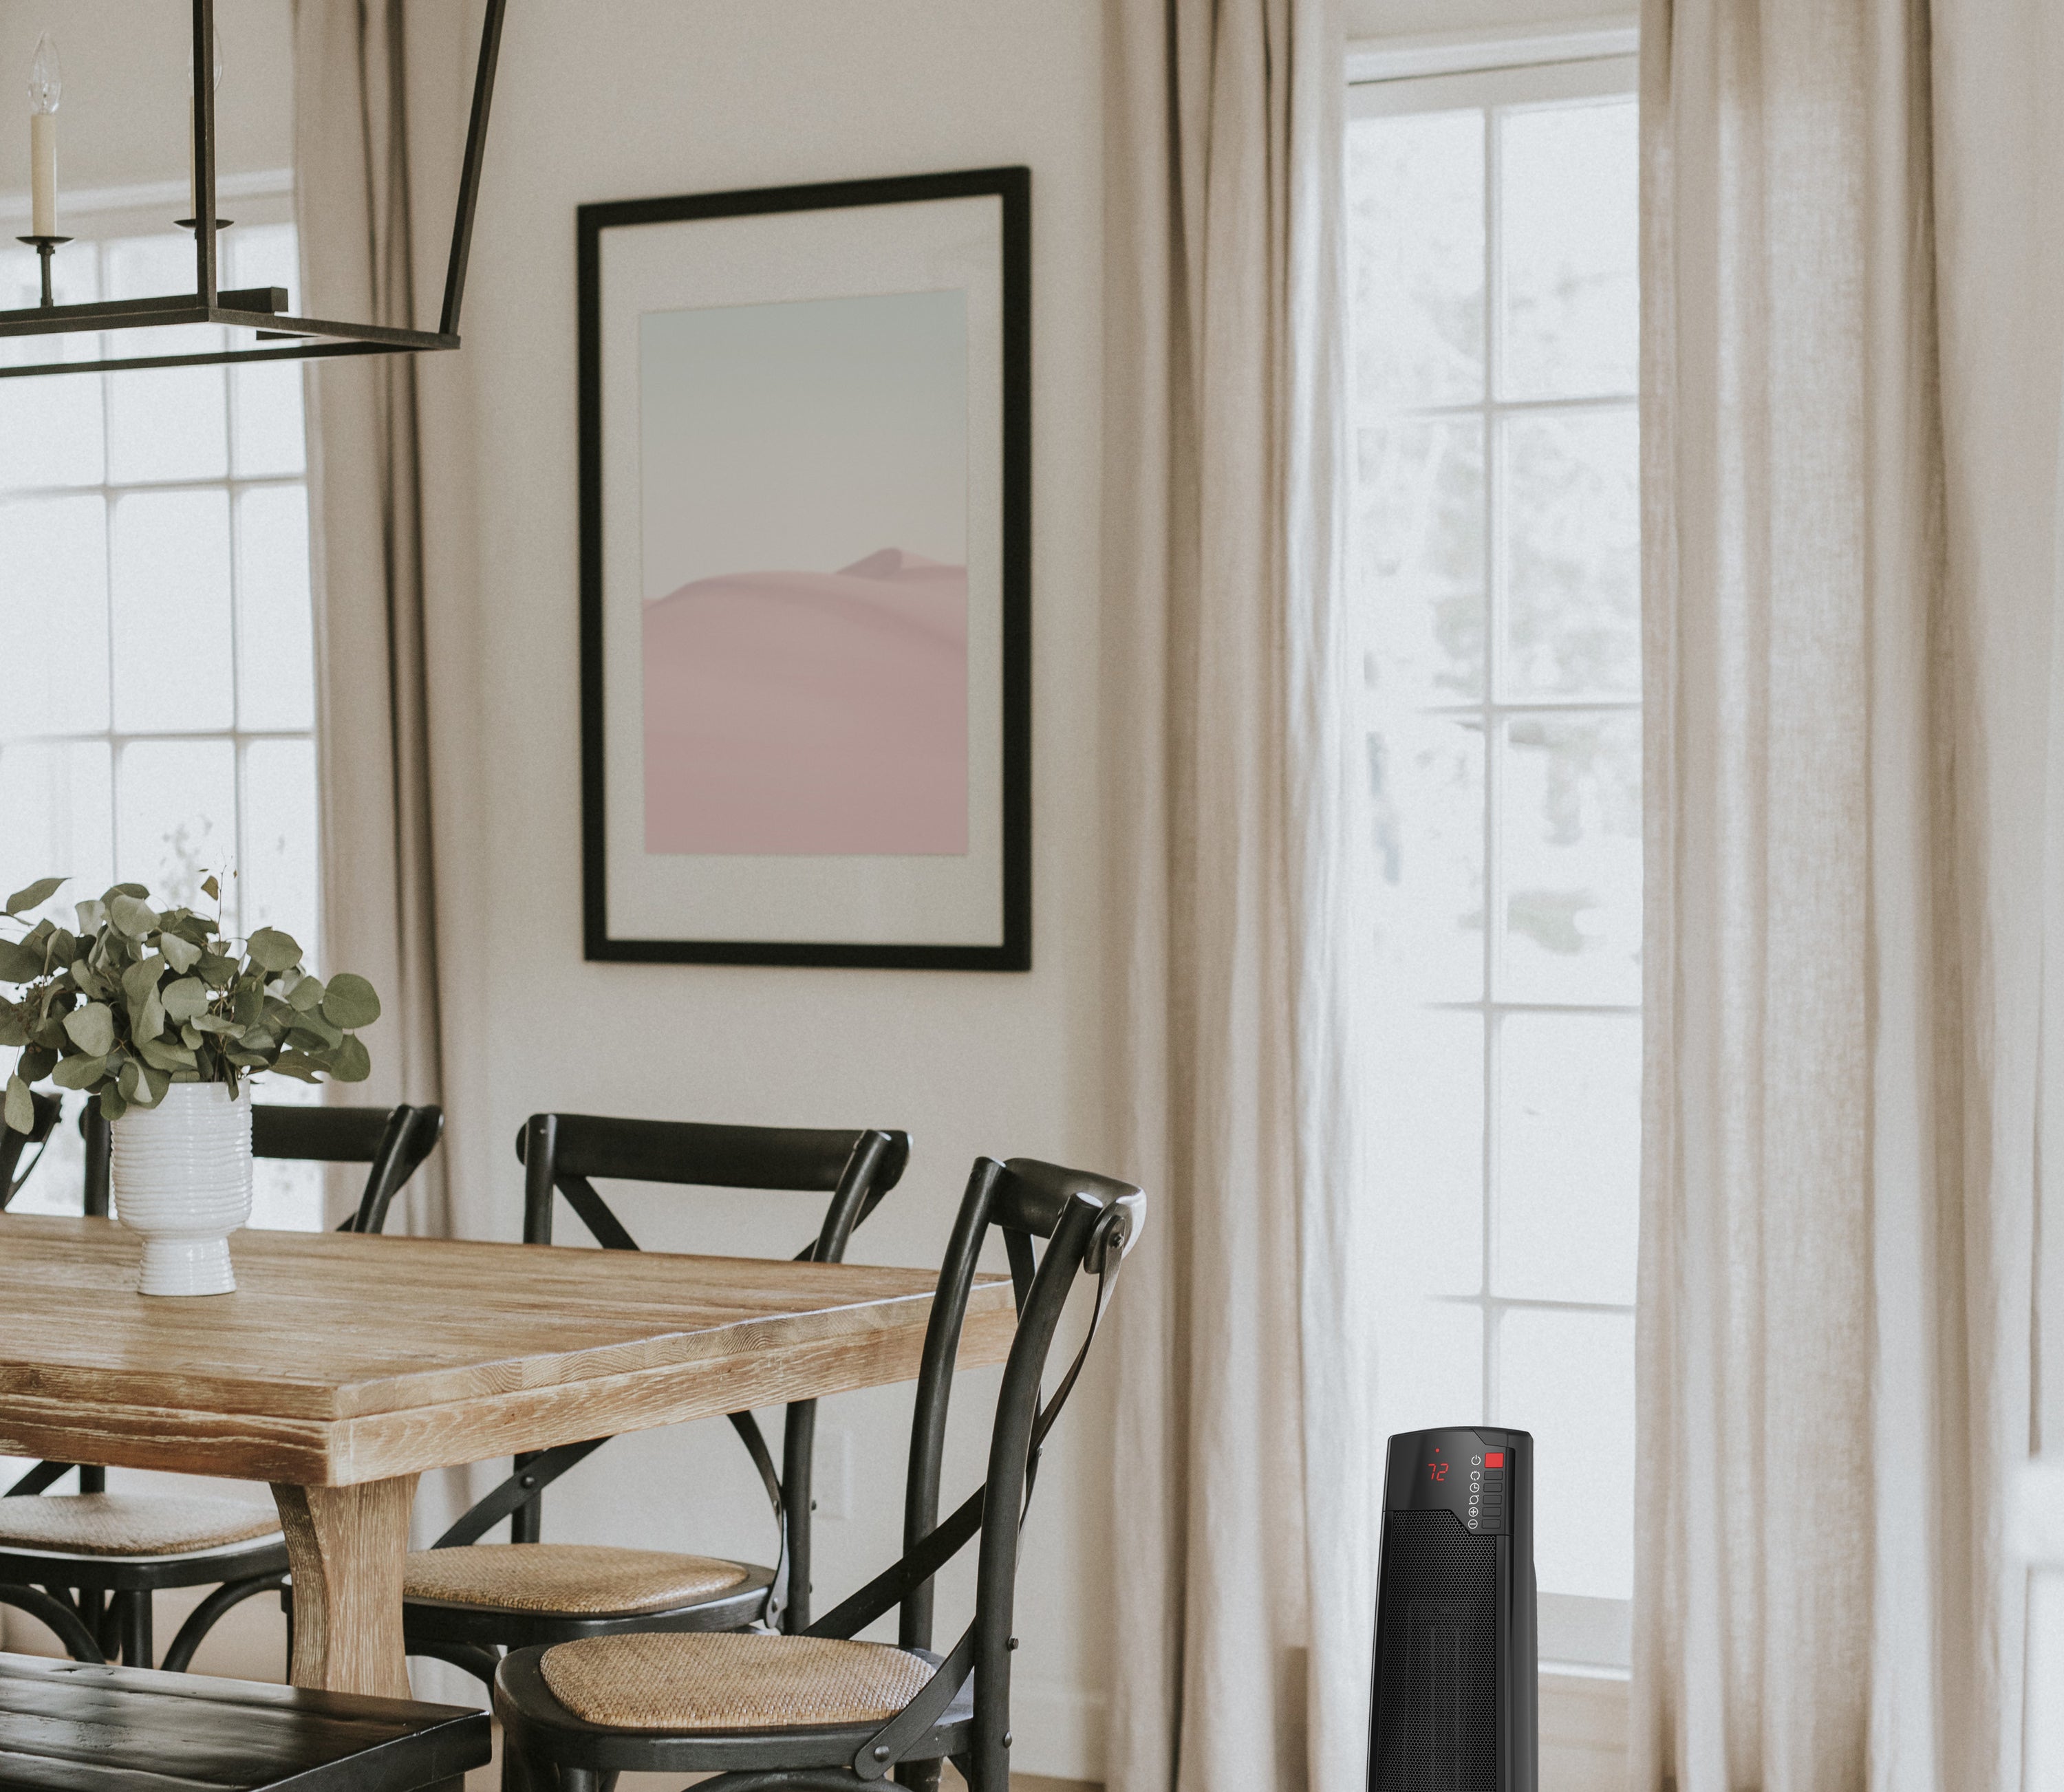 space heater on the floor next to a kitchen table